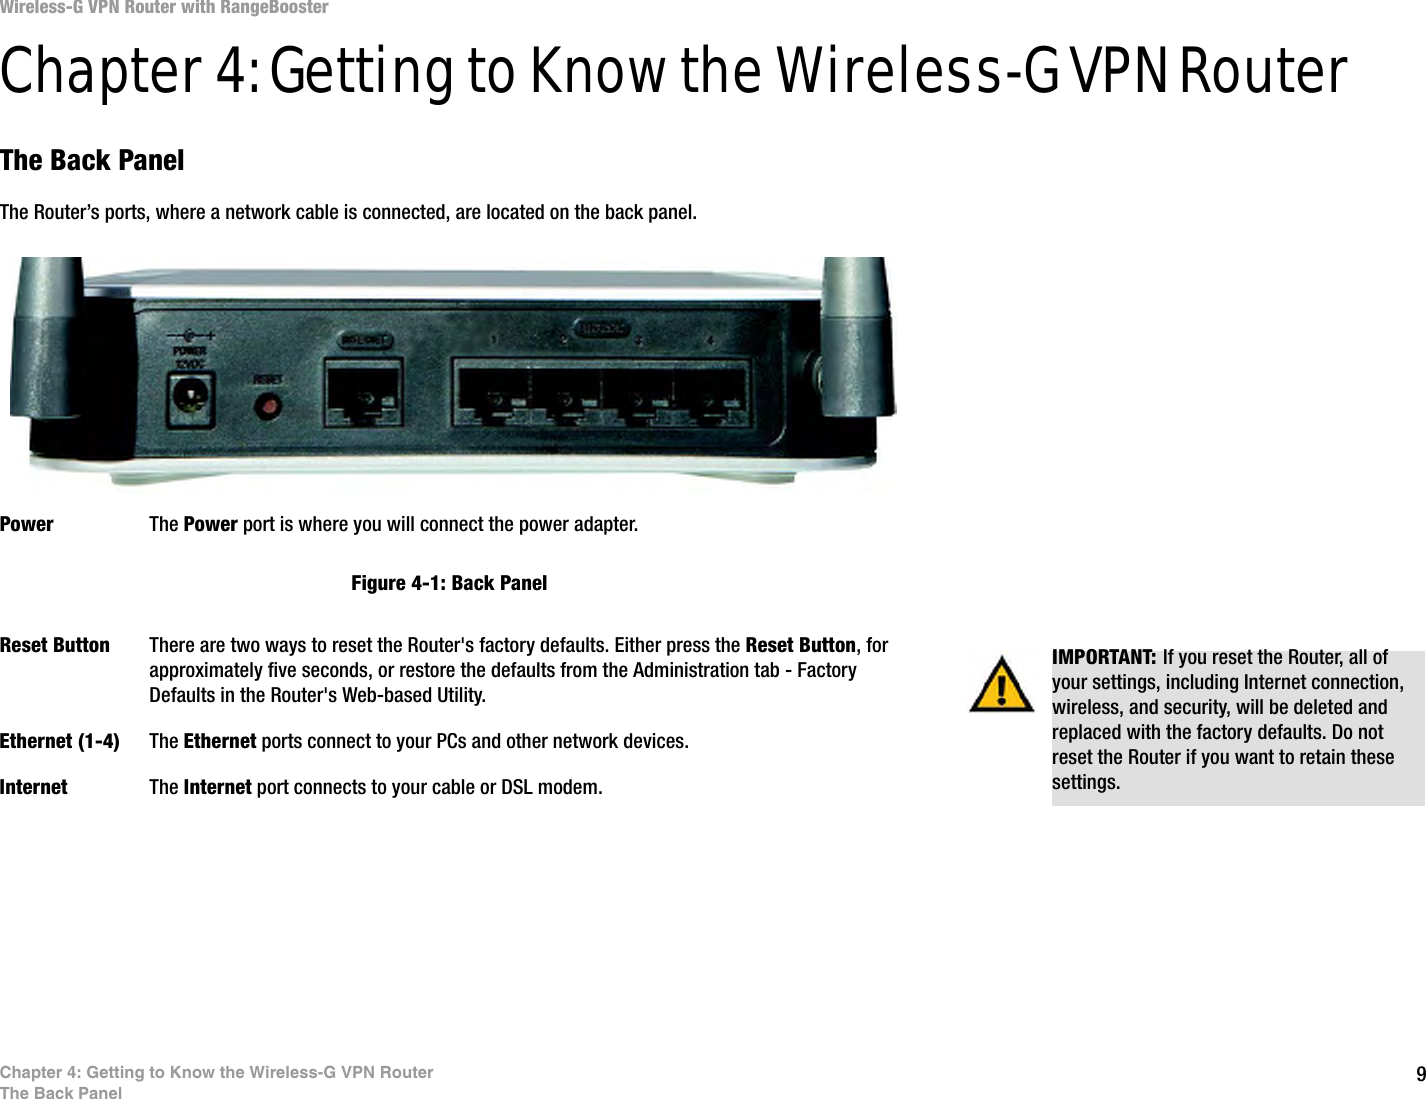 9Chapter 4: Getting to Know the Wireless-G VPN RouterThe Back PanelWireless-G VPN Router with RangeBoosterChapter 4: Getting to Know the Wireless-G VPN RouterThe Back PanelThe Router’s ports, where a network cable is connected, are located on the back panel.Power The Power port is where you will connect the power adapter.Reset Button There are two ways to reset the Router&apos;s factory defaults. Either press the Reset Button, for approximately five seconds, or restore the defaults from the Administration tab - Factory Defaults in the Router&apos;s Web-based Utility.Ethernet (1-4) The Ethernet ports connect to your PCs and other network devices.Internet The Internet port connects to your cable or DSL modem.IMPORTANT: If you reset the Router, all of your settings, including Internet connection, wireless, and security, will be deleted and replaced with the factory defaults. Do not reset the Router if you want to retain these settings.Figure 4-1: Back Panel